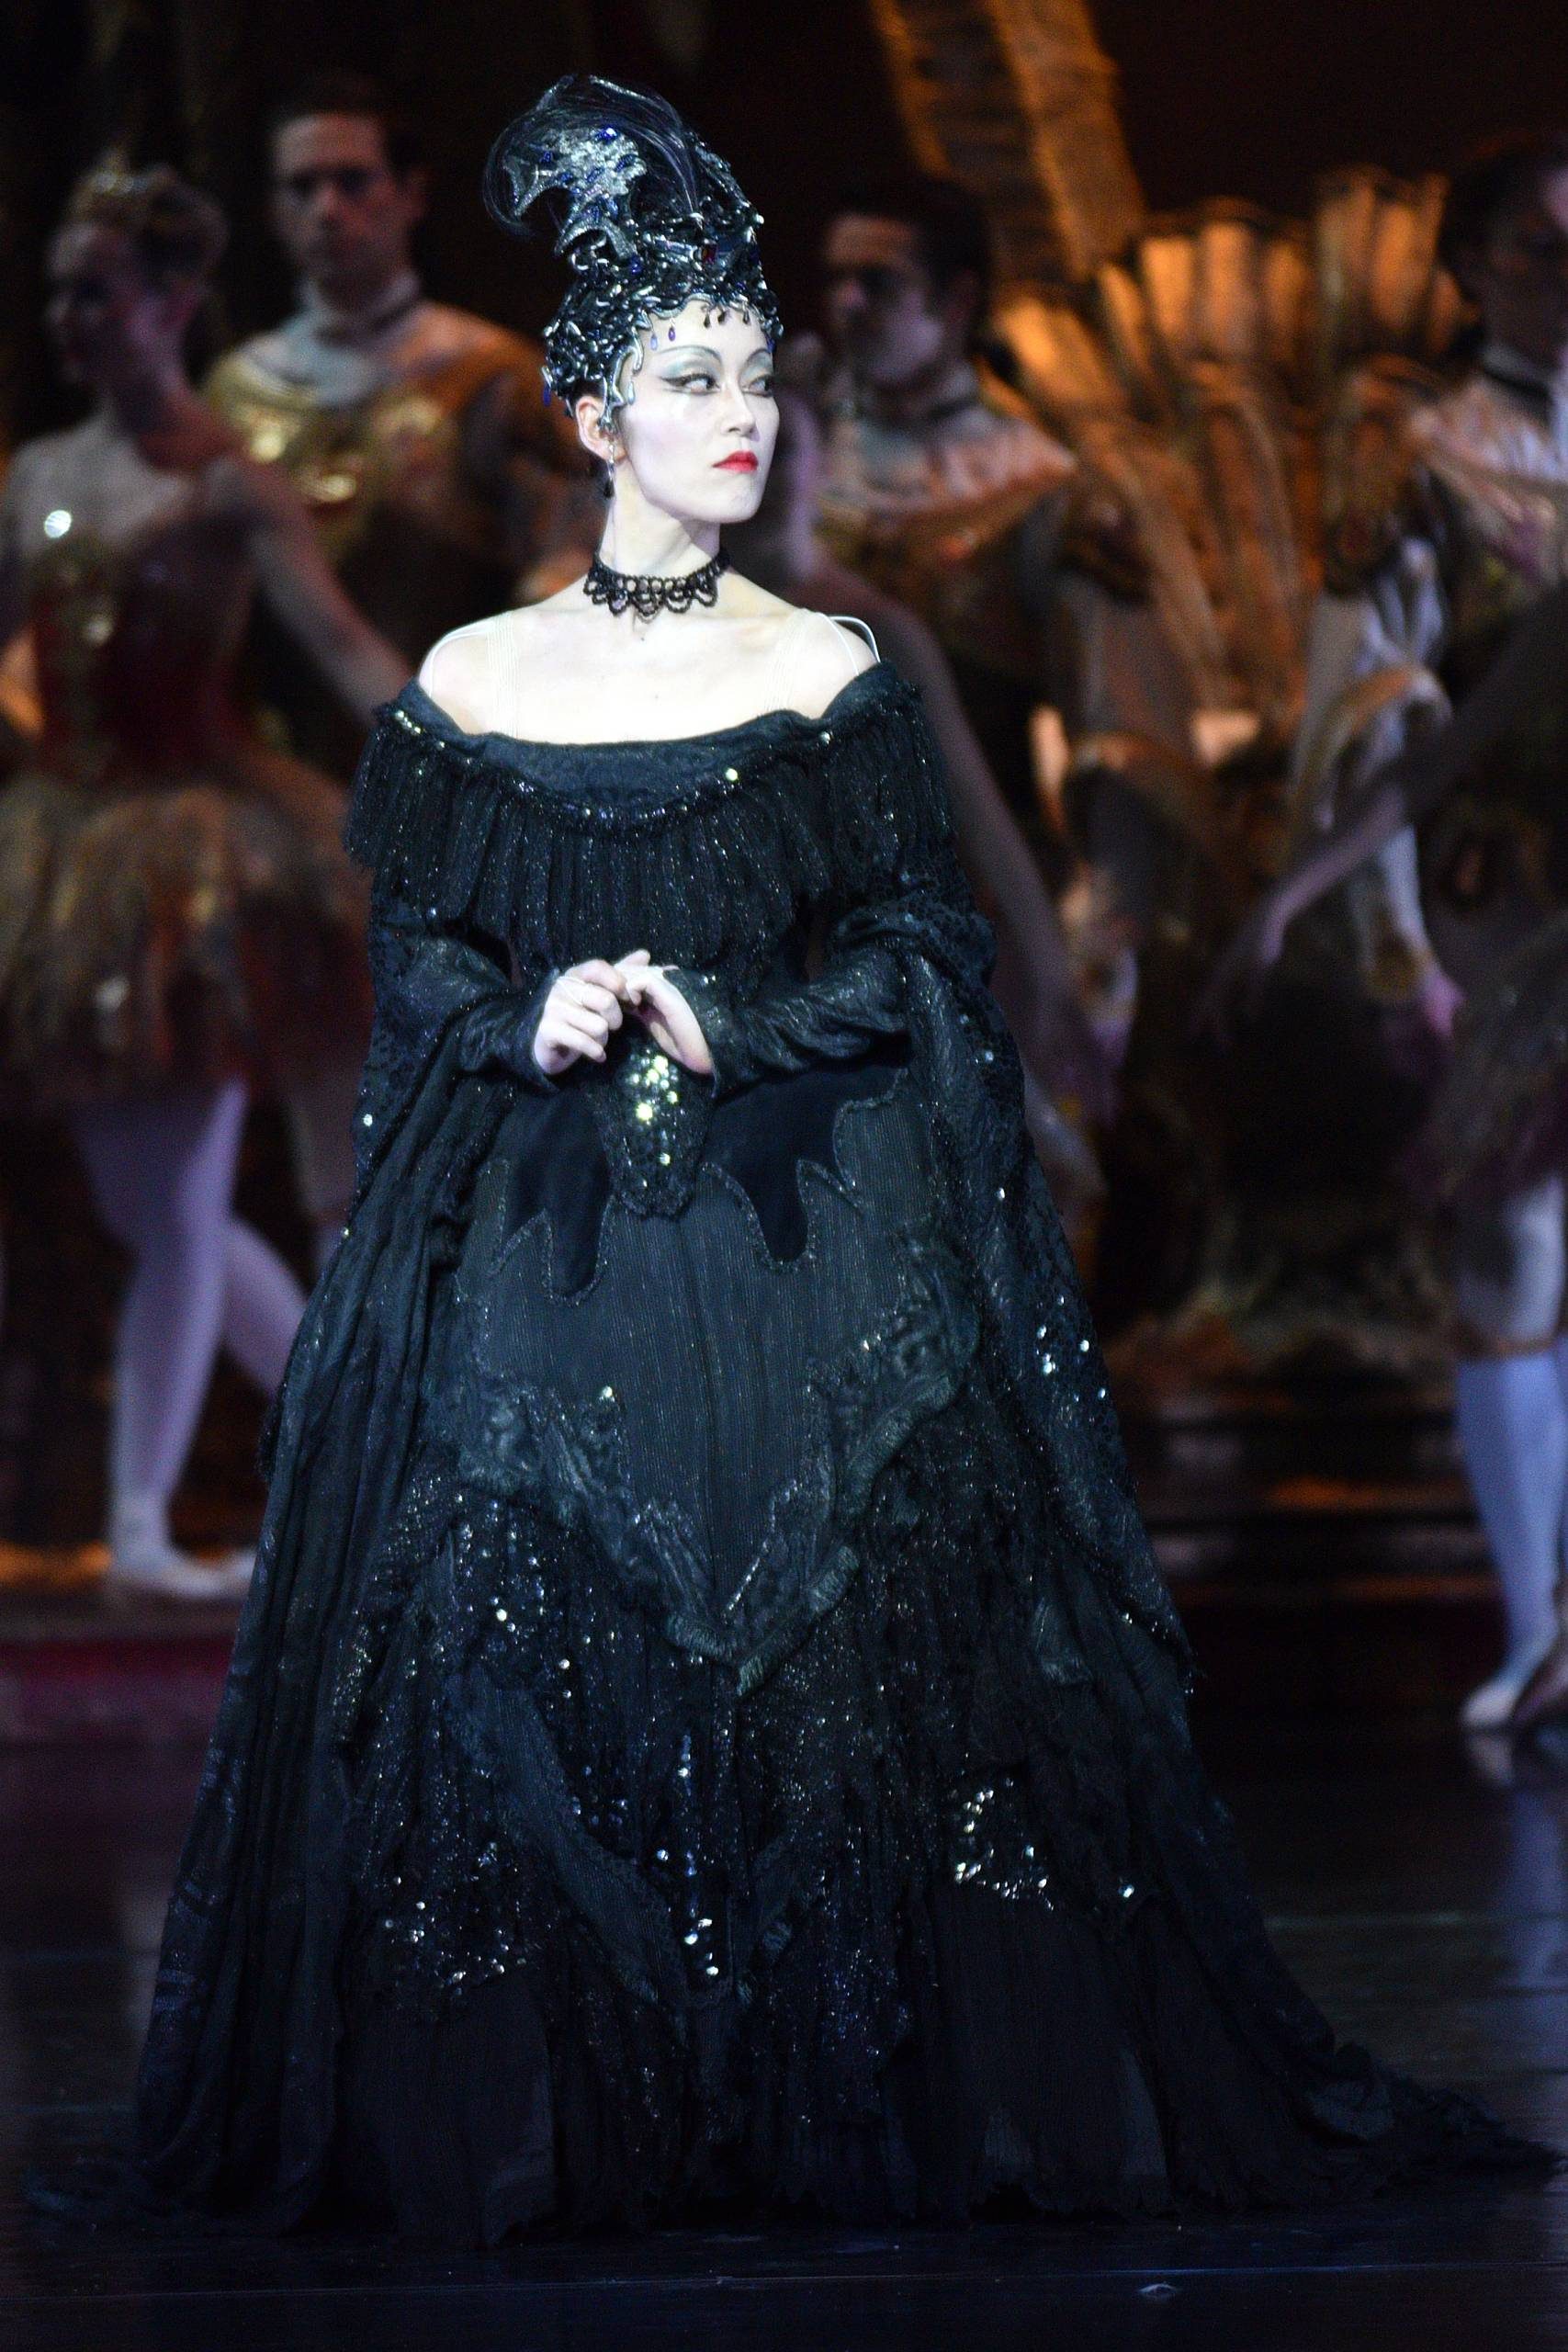 The evil queen stands tall and wears a long black dress. Ensemble dancers are in the background wearing white and gold costumes.